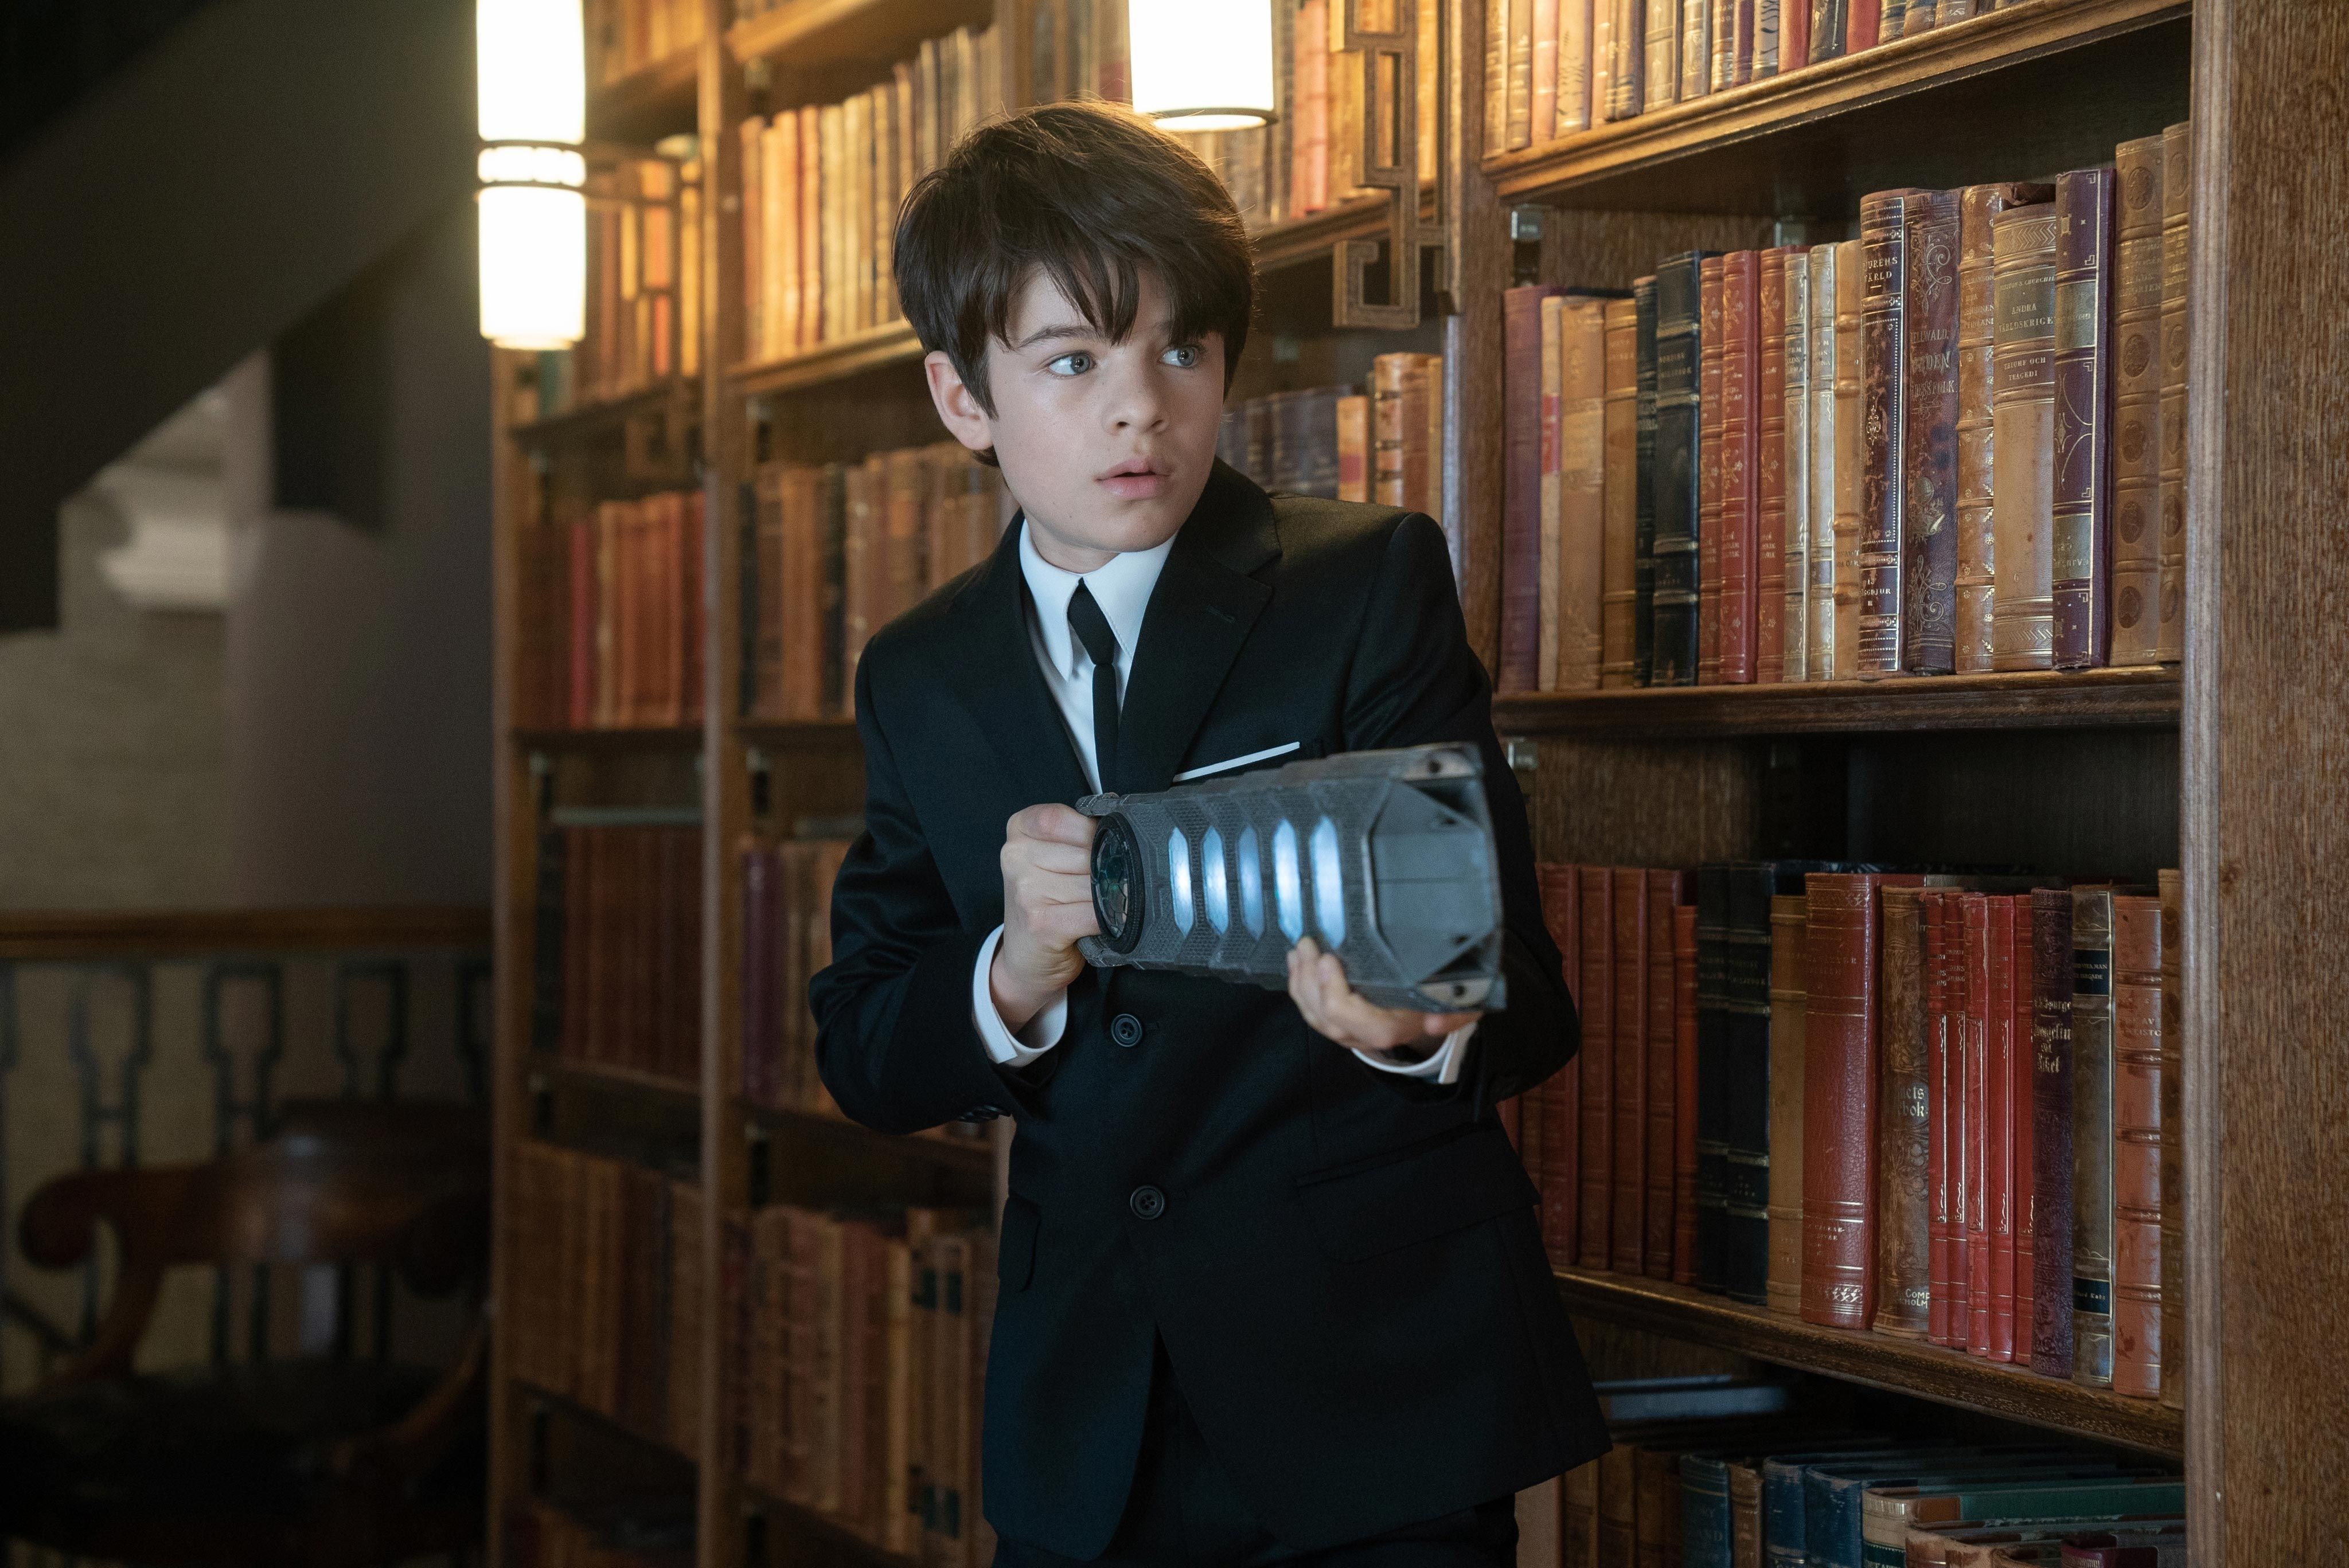 See what critics are saying about Disney's Artemis Fowl movie